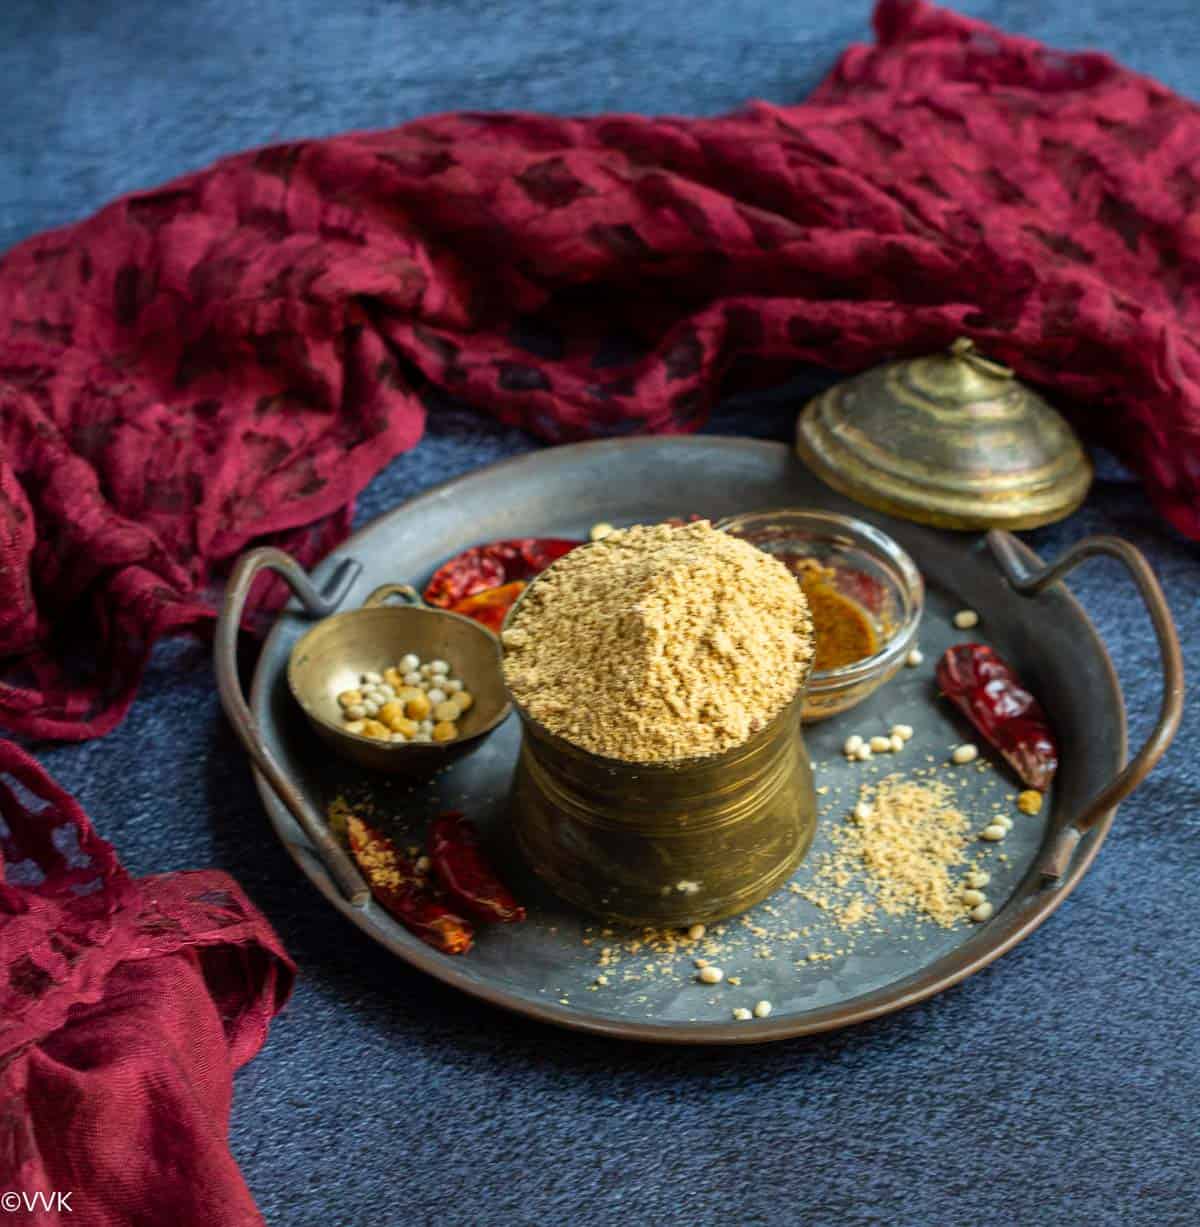 chutney powder in a traditional ware placed on a tray with lentils and chilies on the side